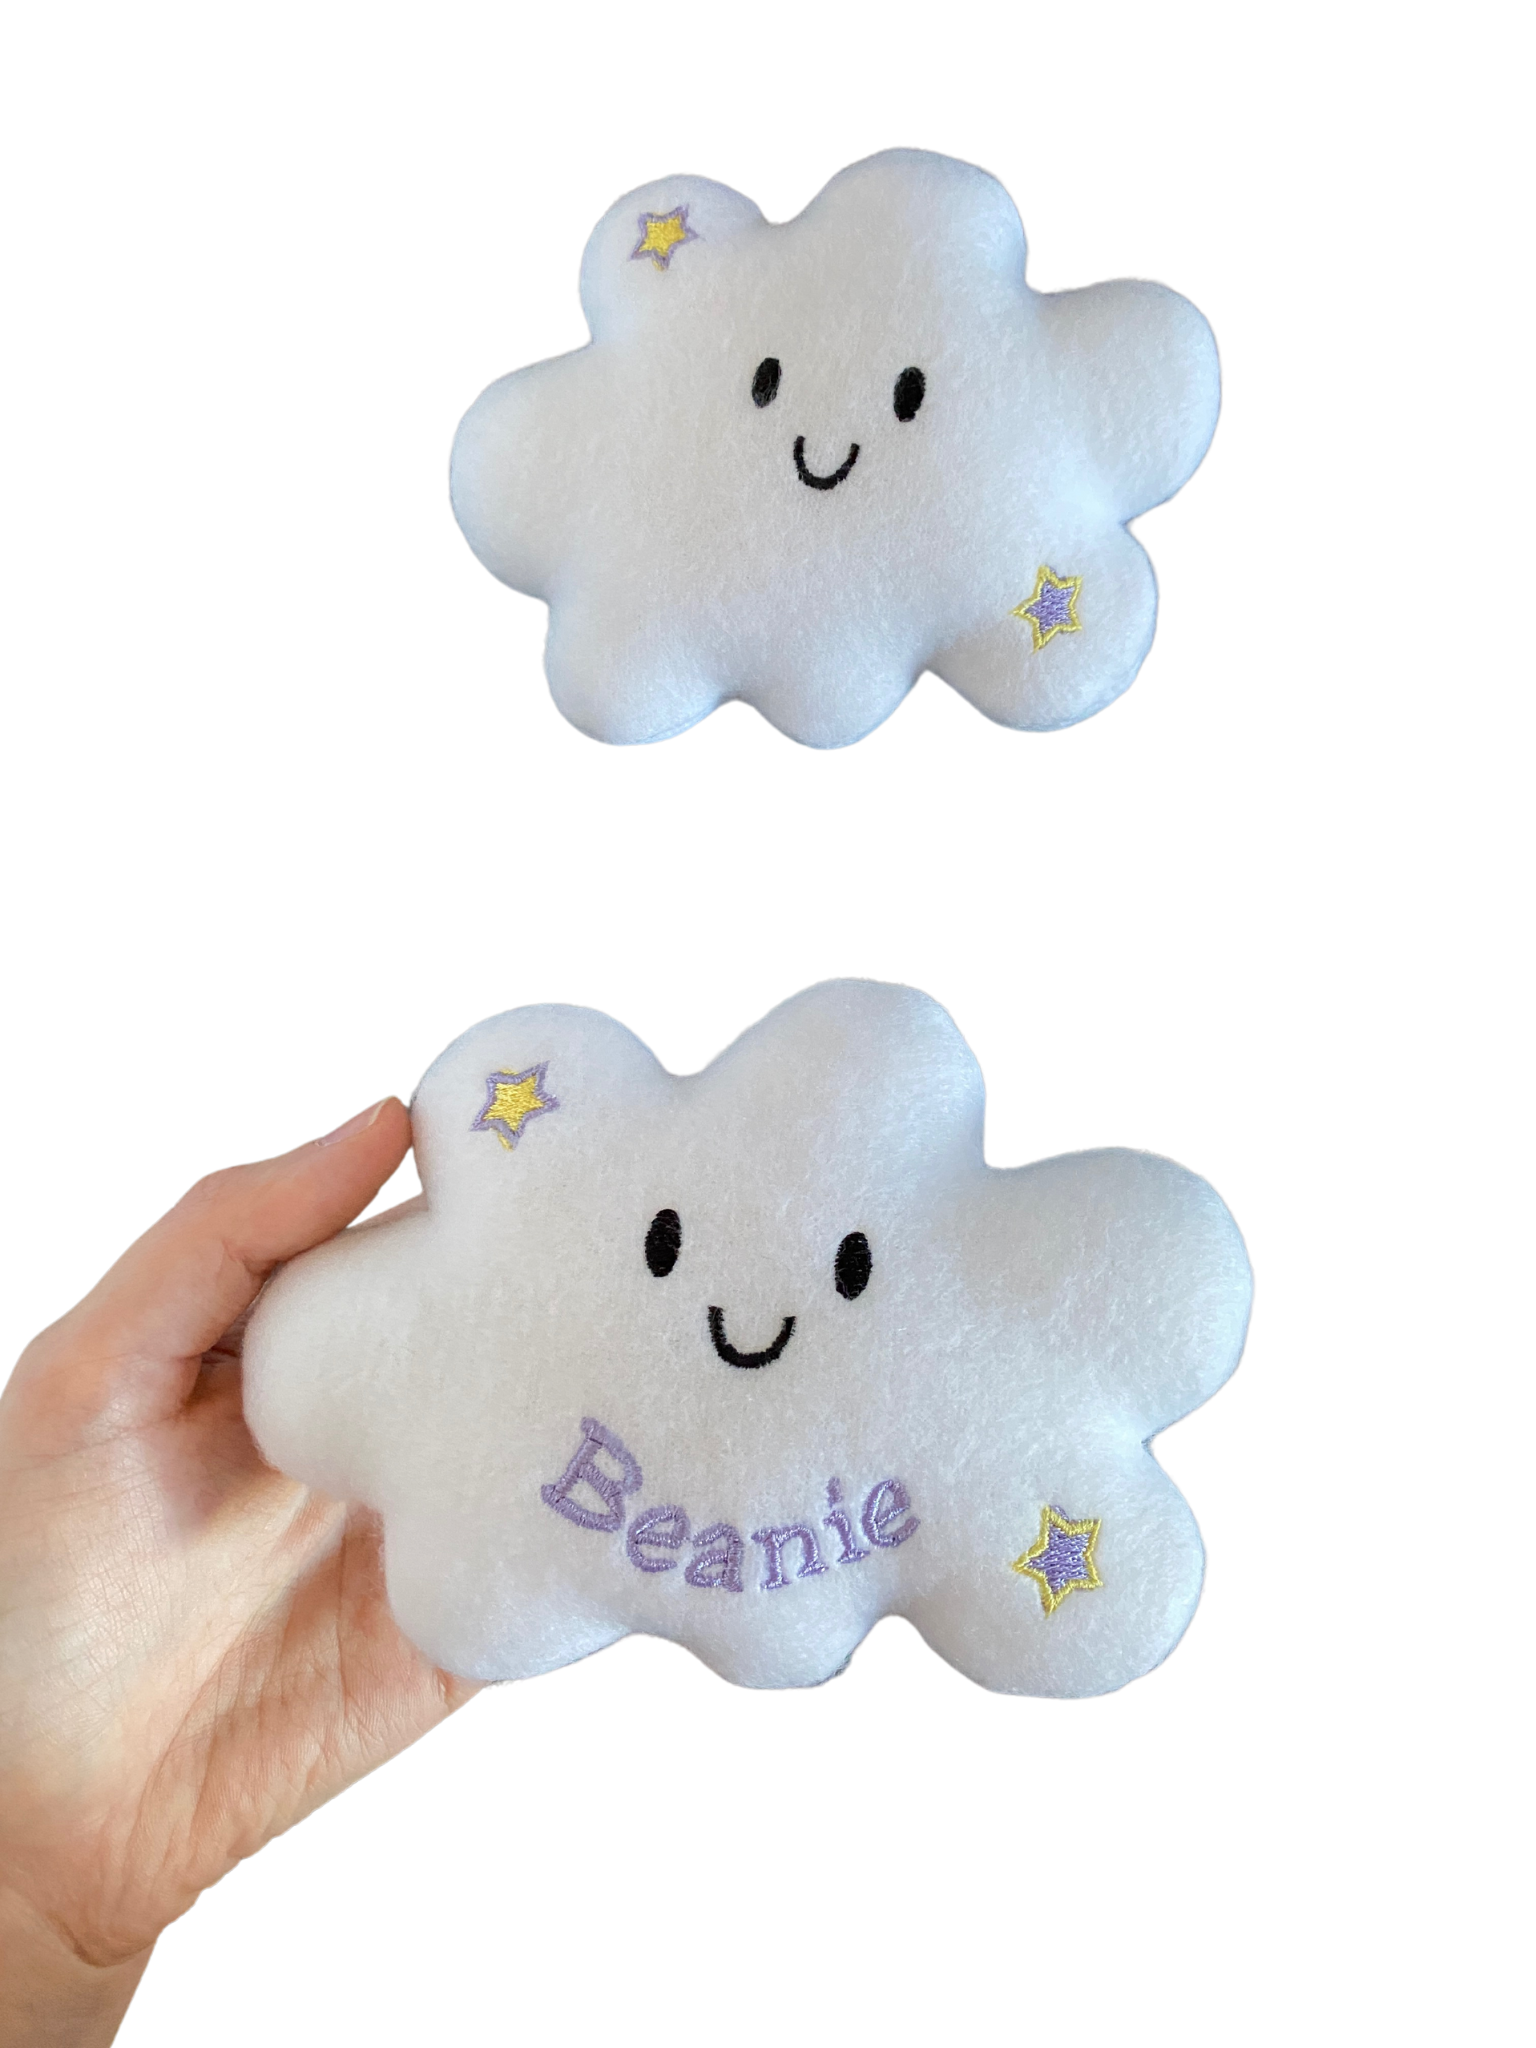 Cloud Personalized Squeaker Dog Toy- Handmade Custom Dog Toy